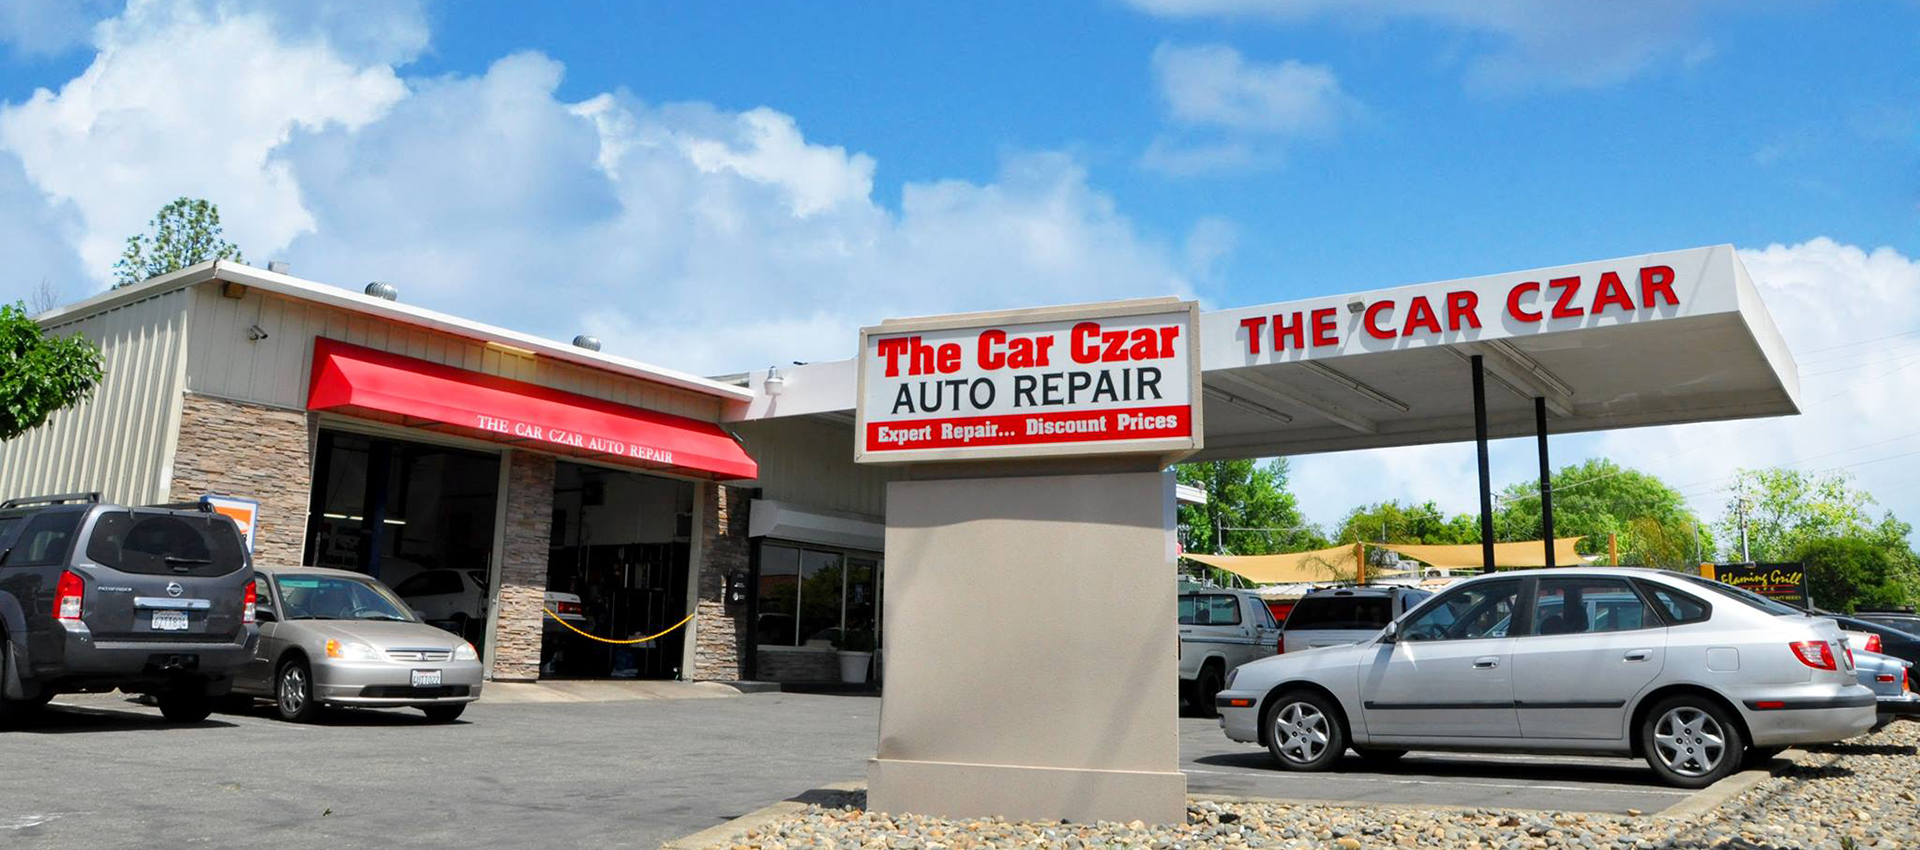 The Car Czar — Quality auto repairs, affordable prices in Sacramento